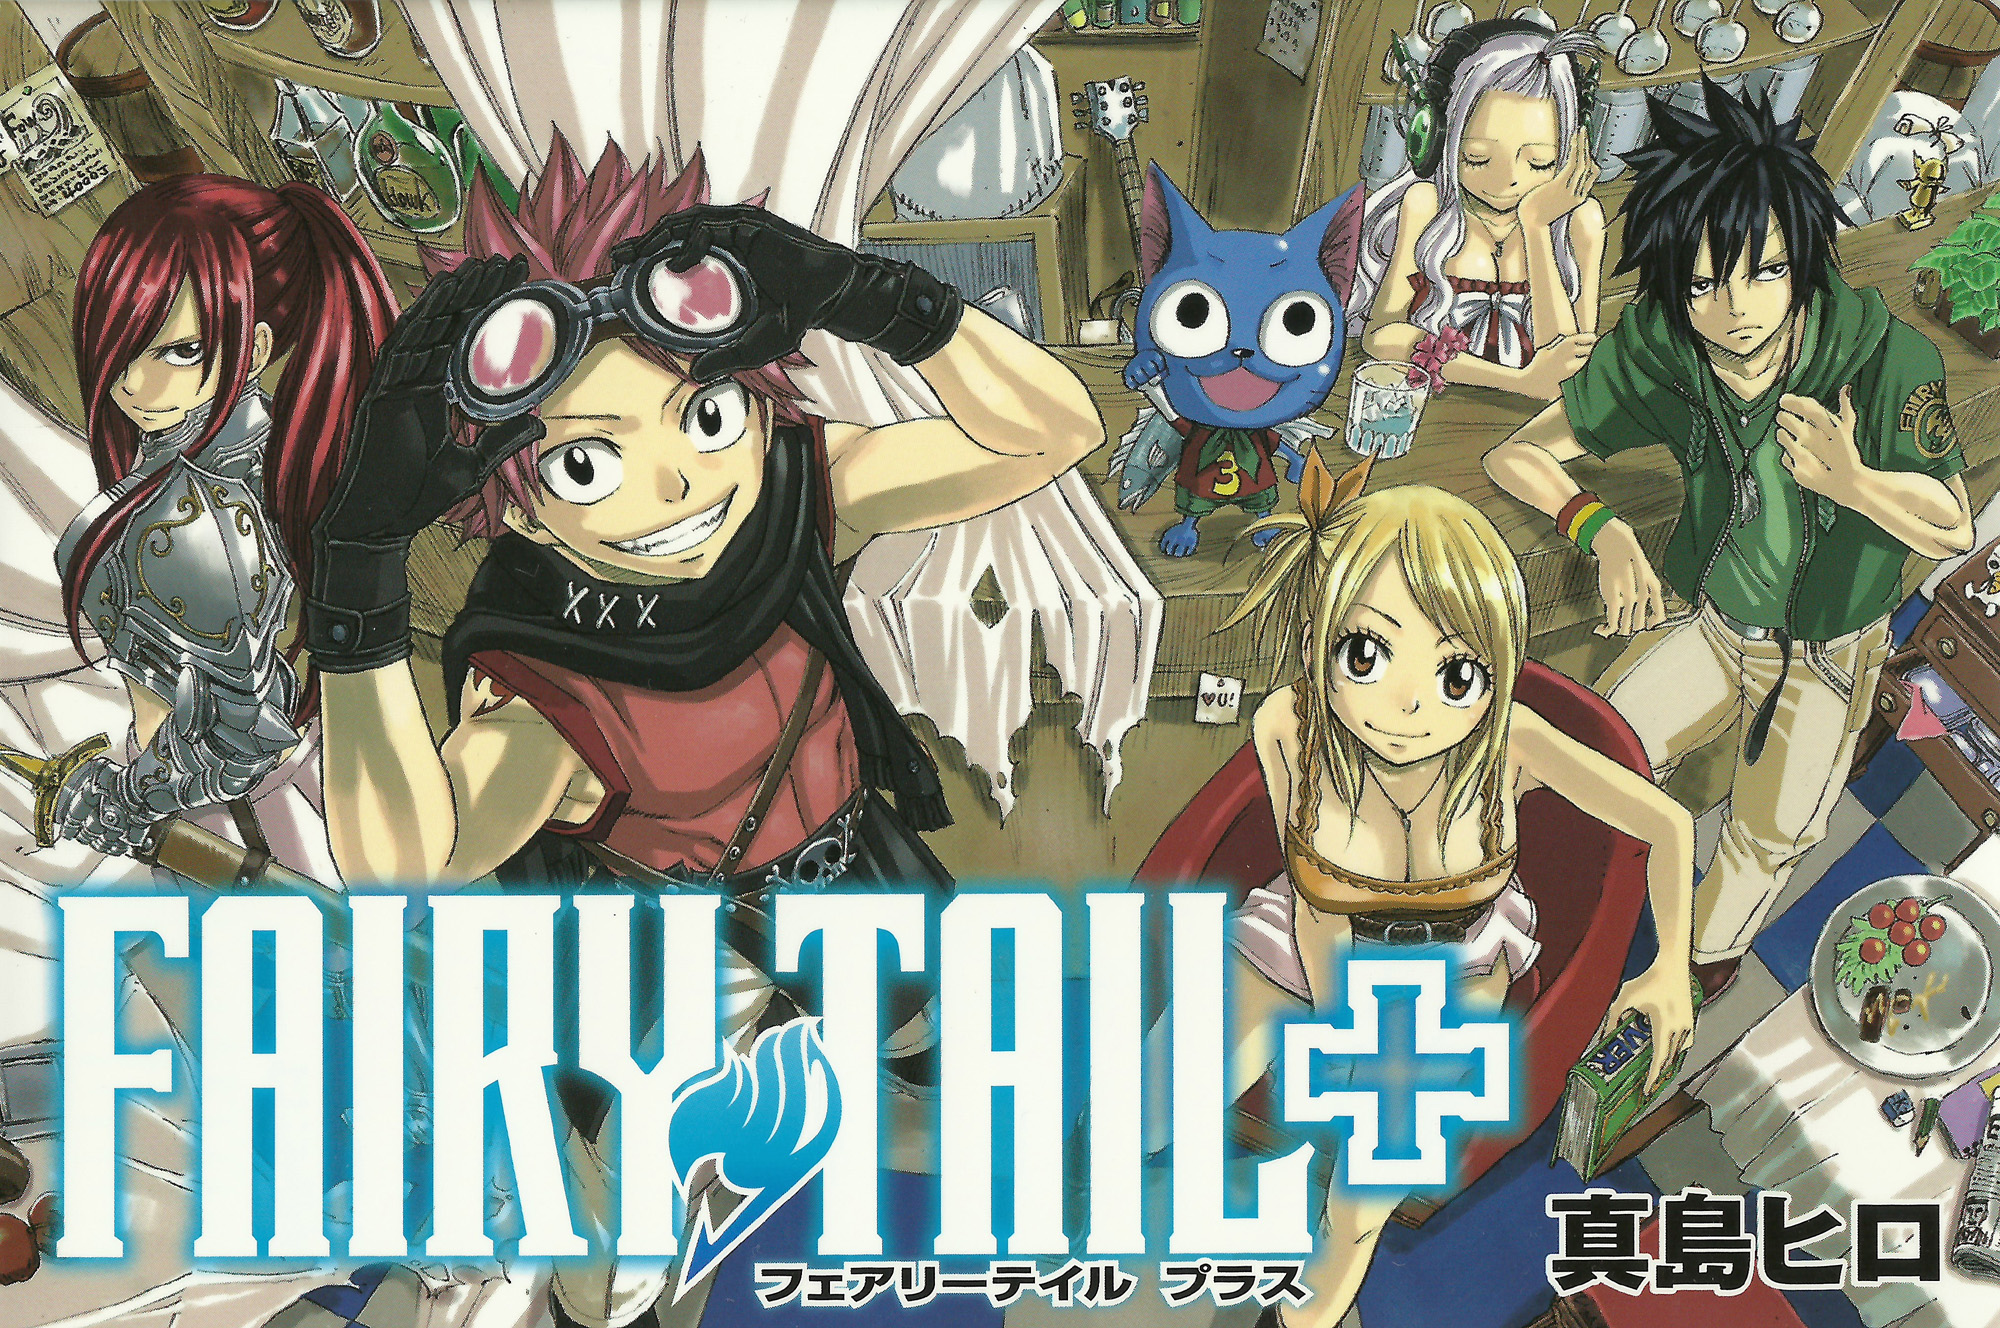 Free download wallpaper Anime, Fairy Tail, Lucy Heartfilia, Natsu Dragneel, Erza Scarlet, Gray Fullbuster, Happy (Fairy Tail), Mirajane Strauss on your PC desktop